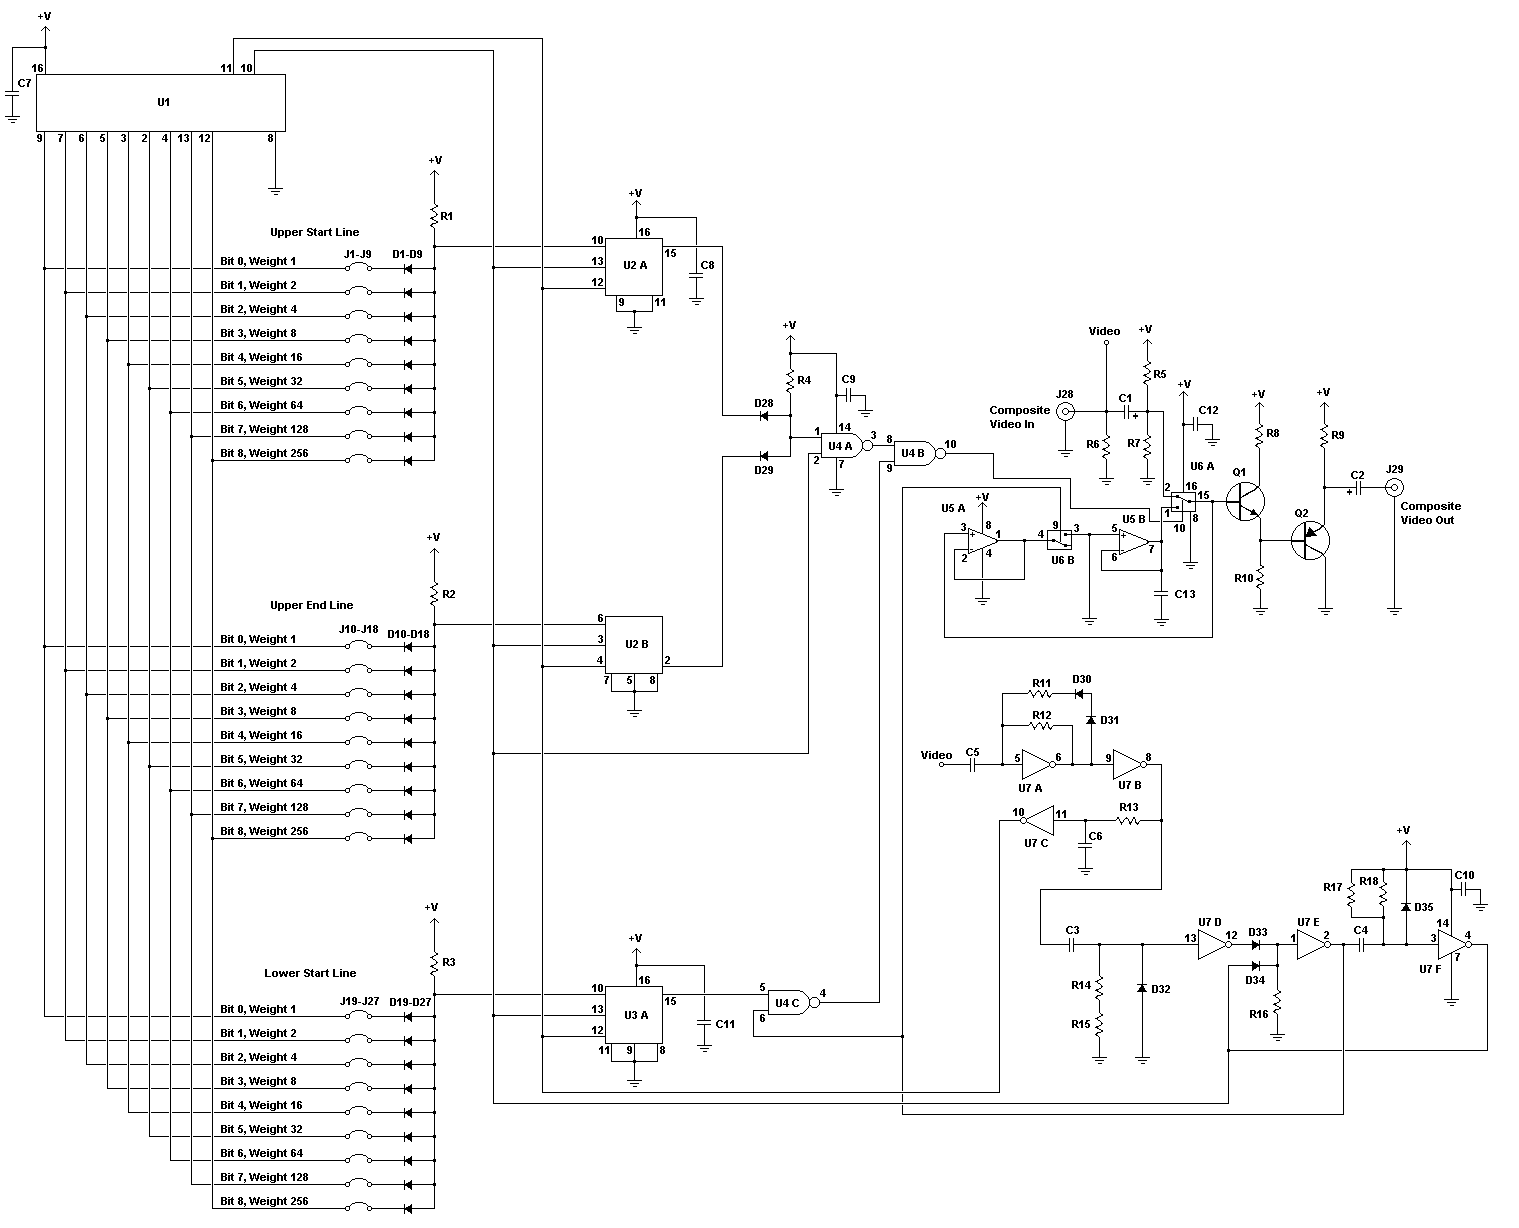 This is the schematic of the Macrovision removal circuit